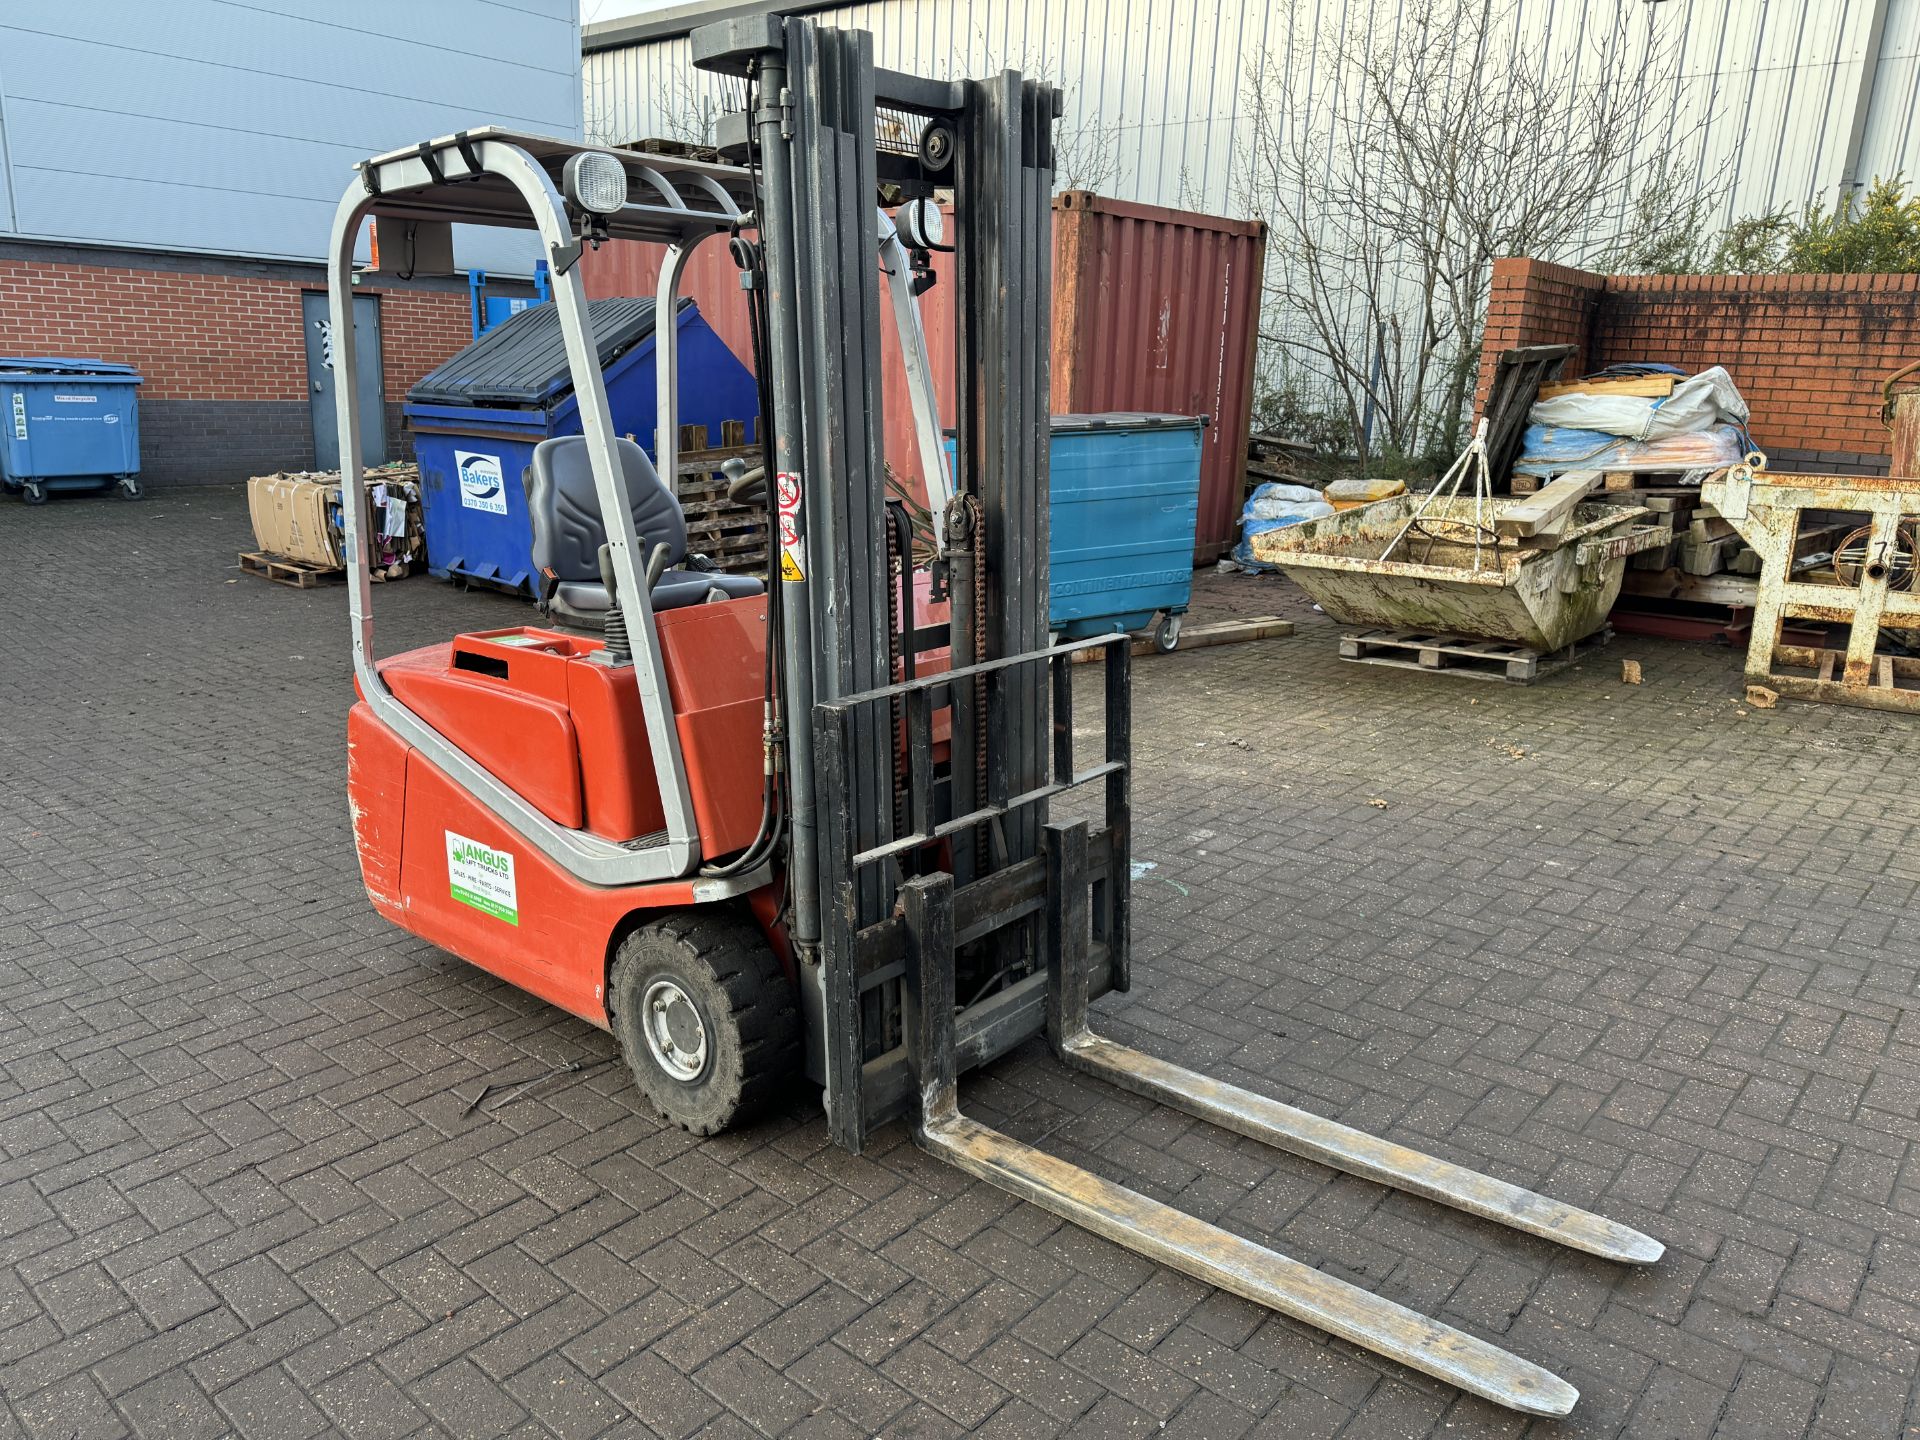 Cargo Model C 3 E 150 Tri Wheel Container Specification Electric Reach Truck - Image 7 of 28